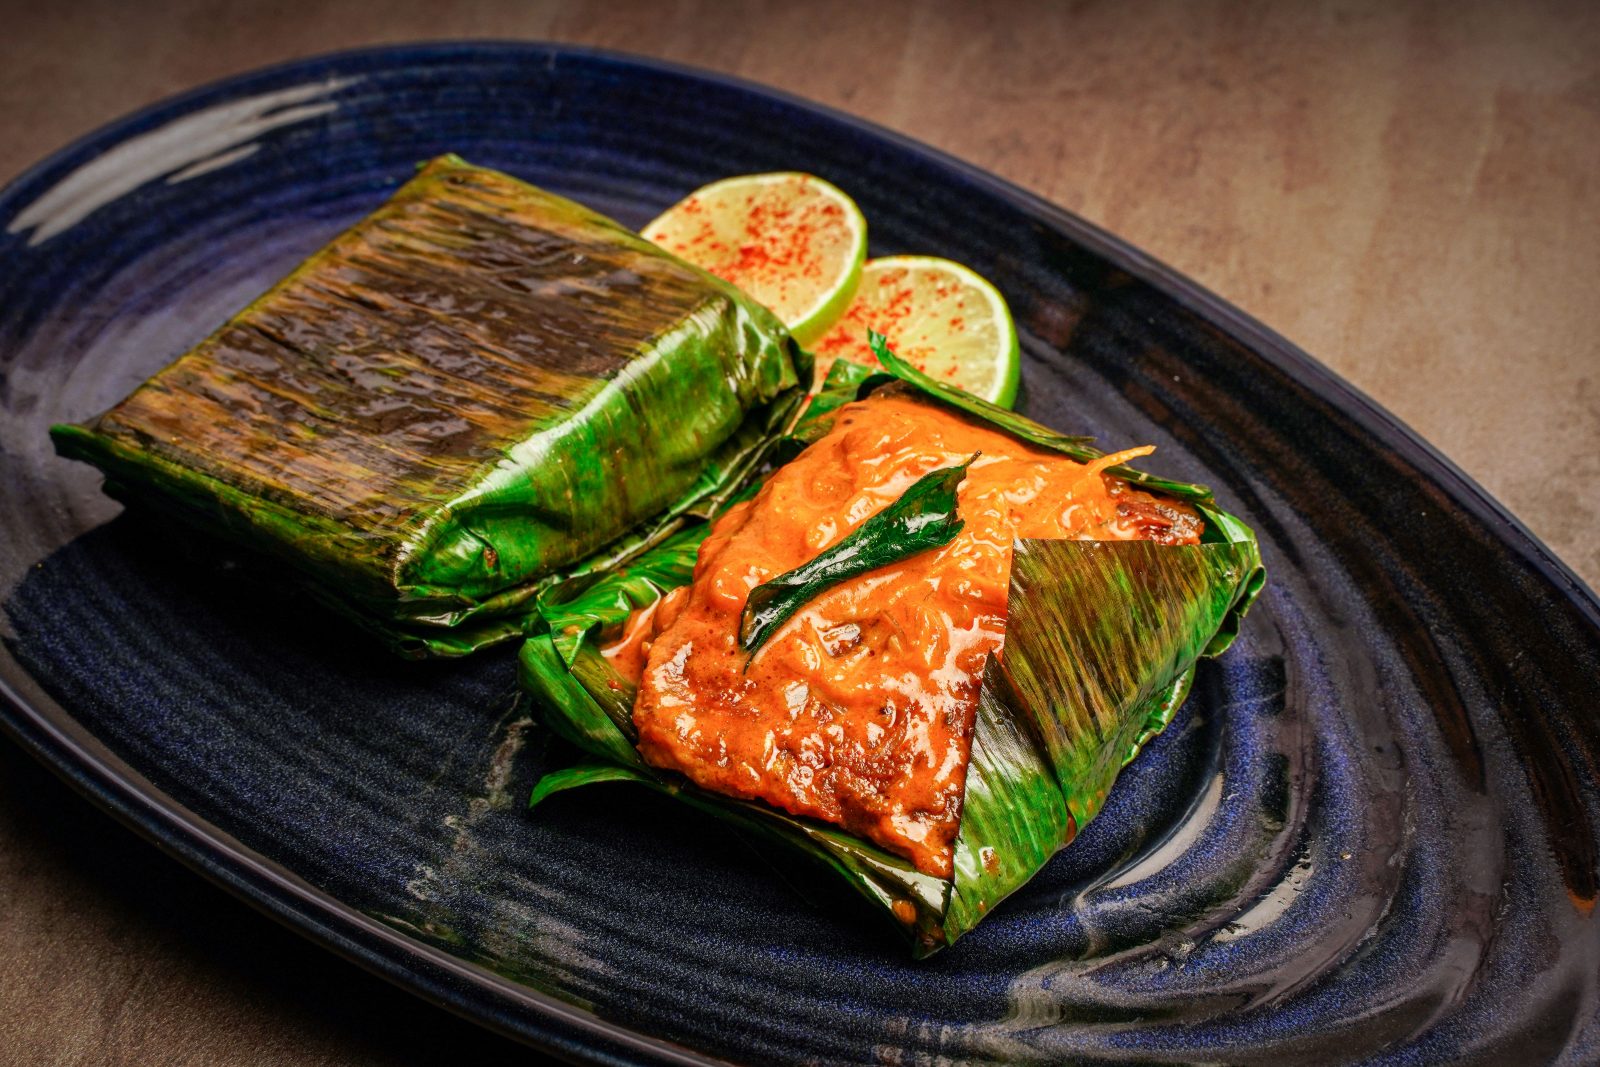 A fillet of sea bass in a banana leaf.